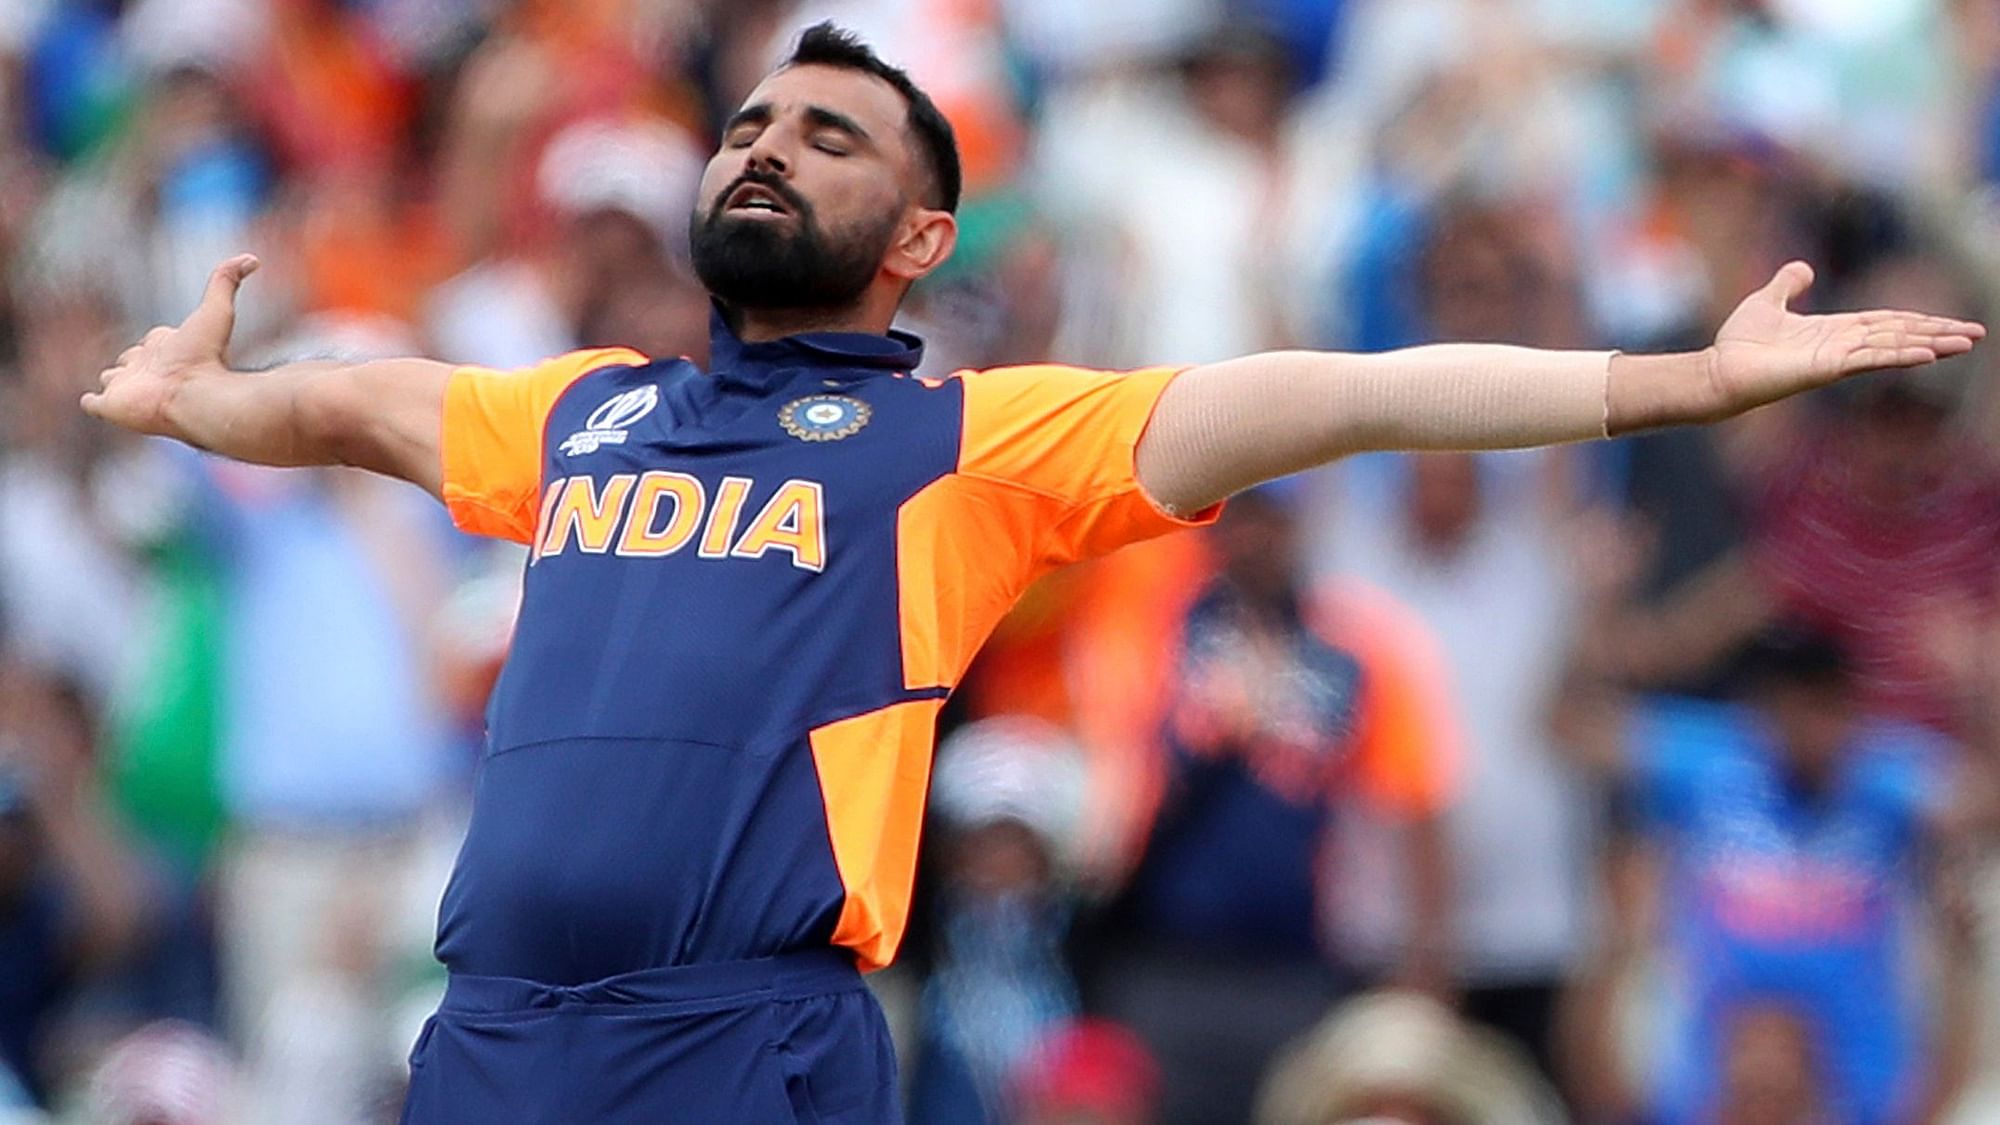 This is Shami’s first fifer in ODI cricket.